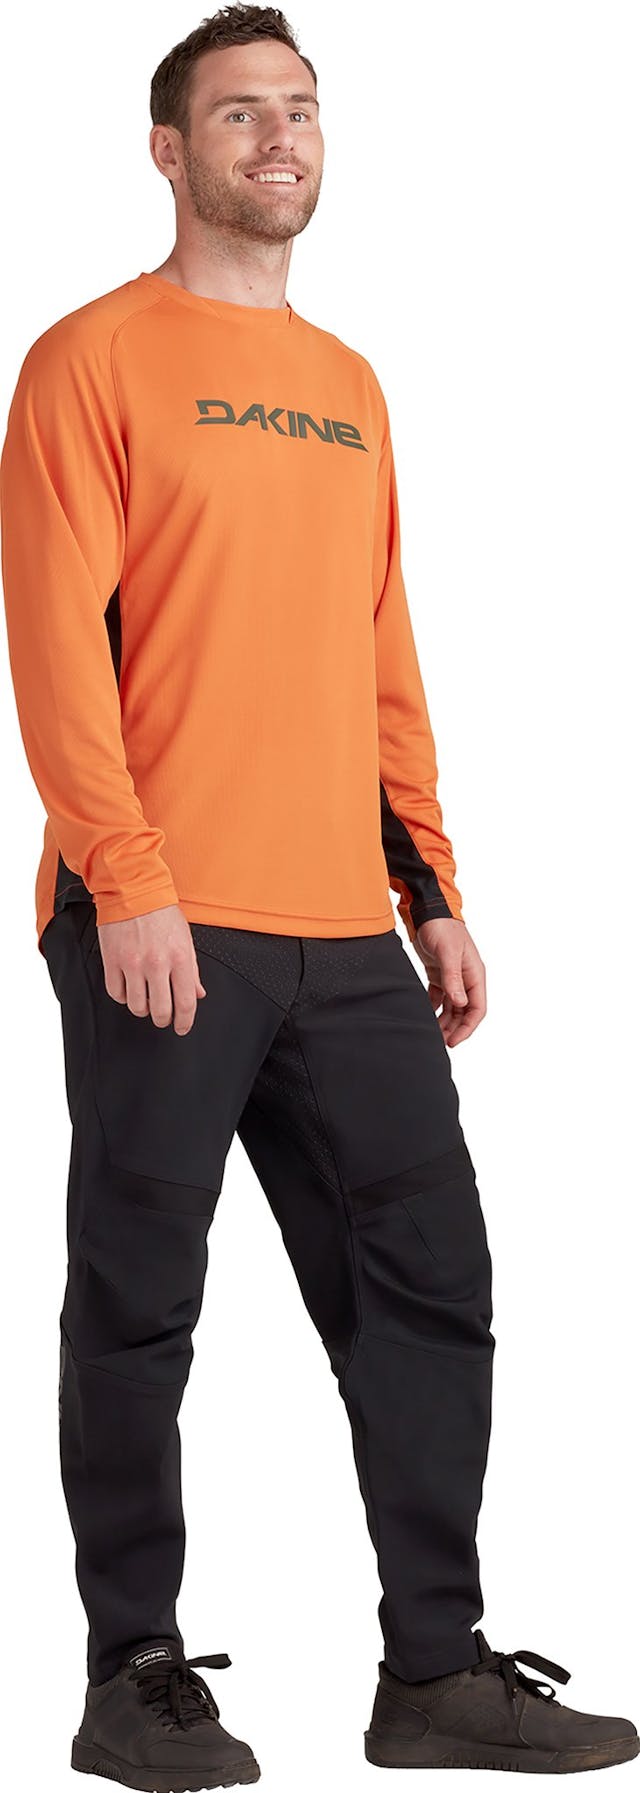 Product image for Thrillium Long Sleeve Jersey - Men's